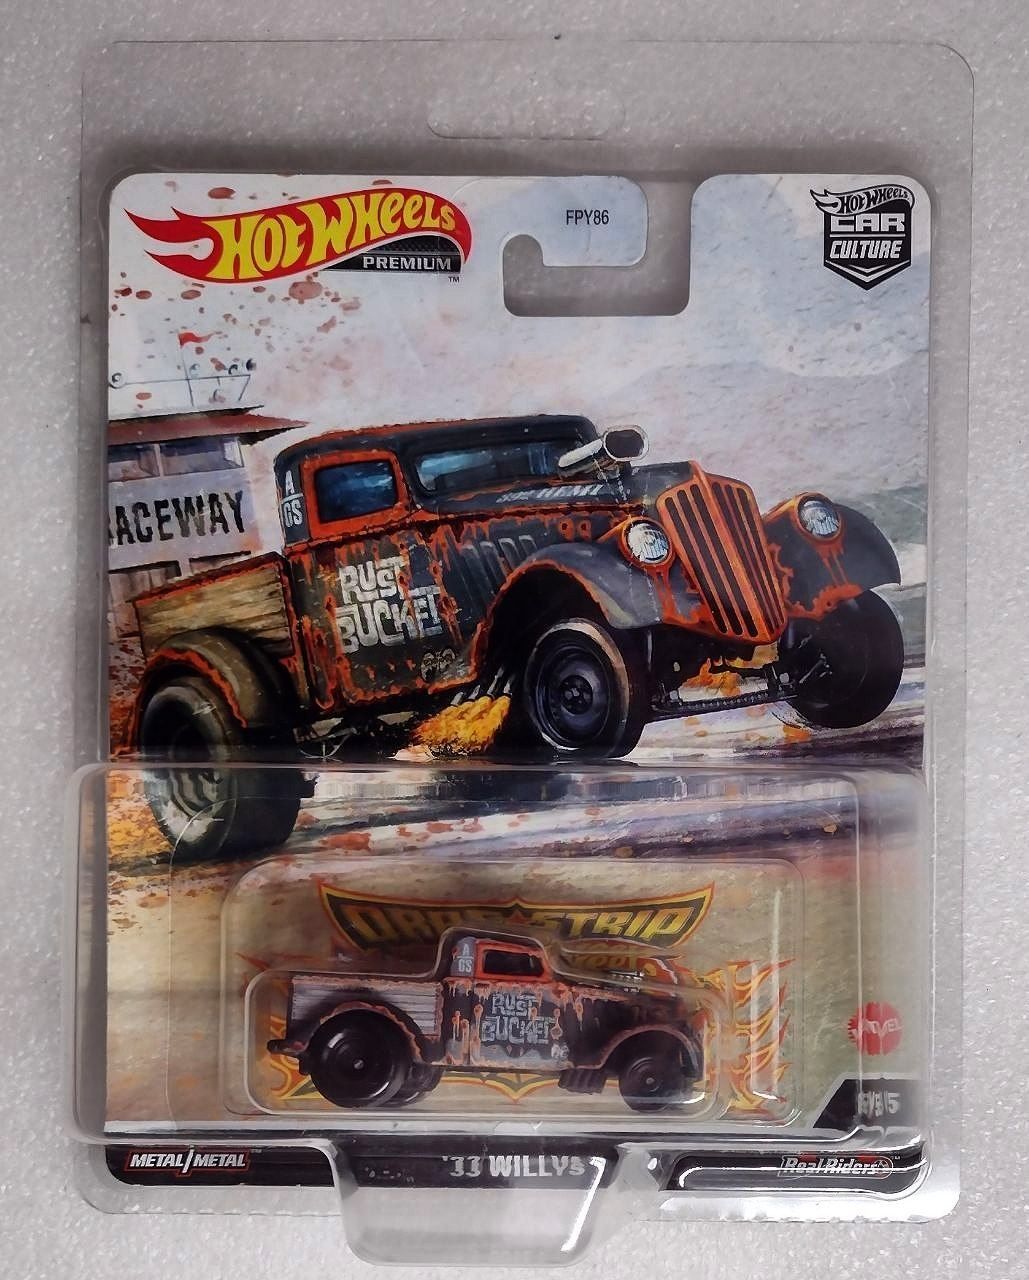 Hot Wheels Premium Car Culture 33 Willys Chase#id23